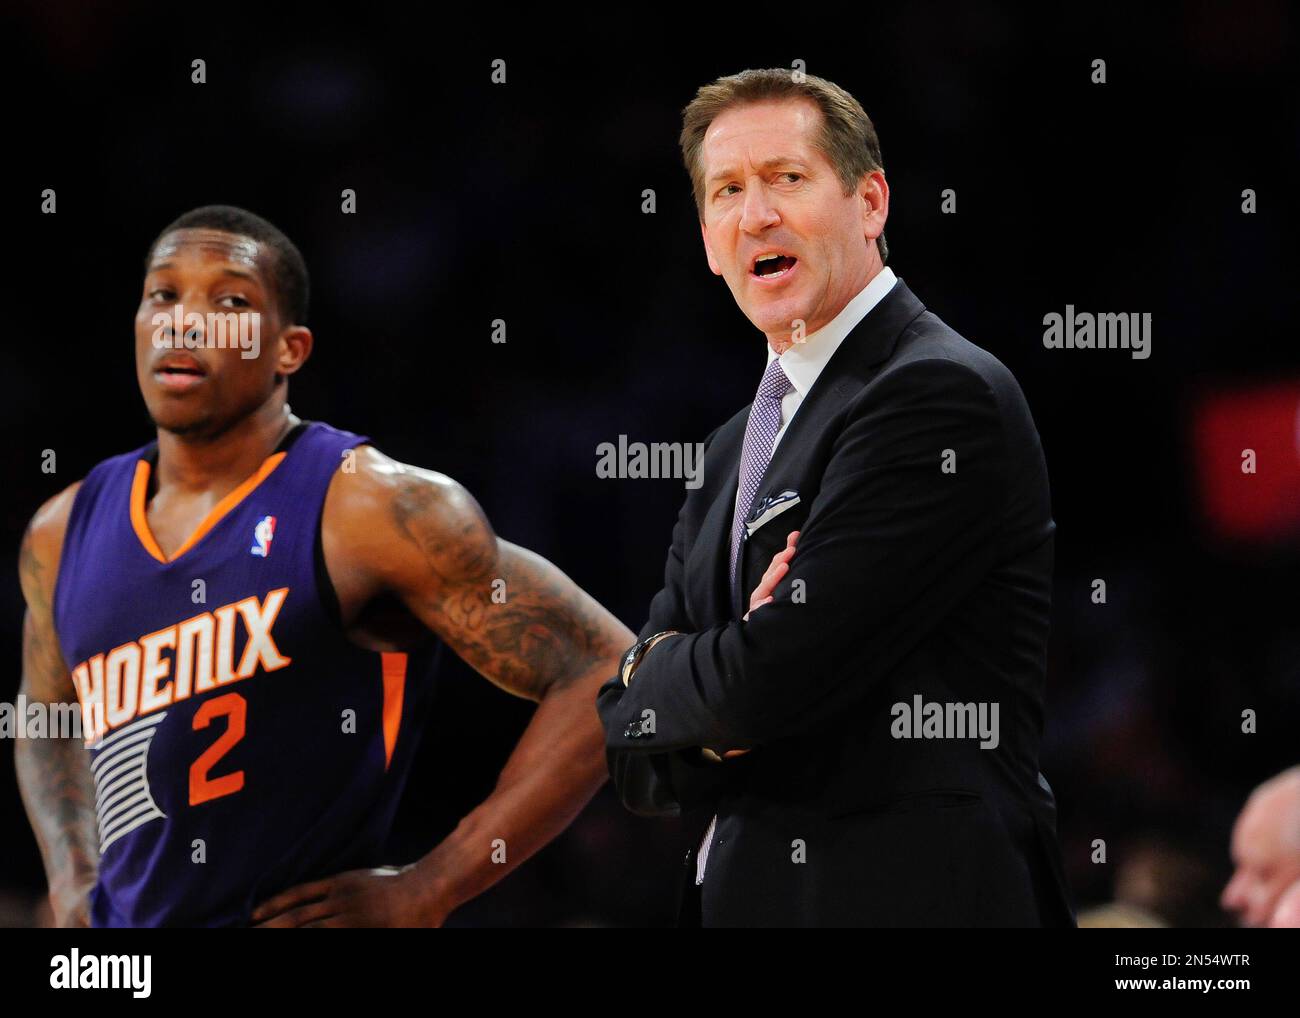 Phoenix Suns head coach Jeff Hornacek reacts during a timeout as Phoenix Suns guard Eric Bledsoe (2) looks on in the first half of an NBA basketball game against the Los Angeles Lakers, Sunday, March 30, 2014, in Los Angeles.(AP Photo/Gus Ruelas) Stock Photo